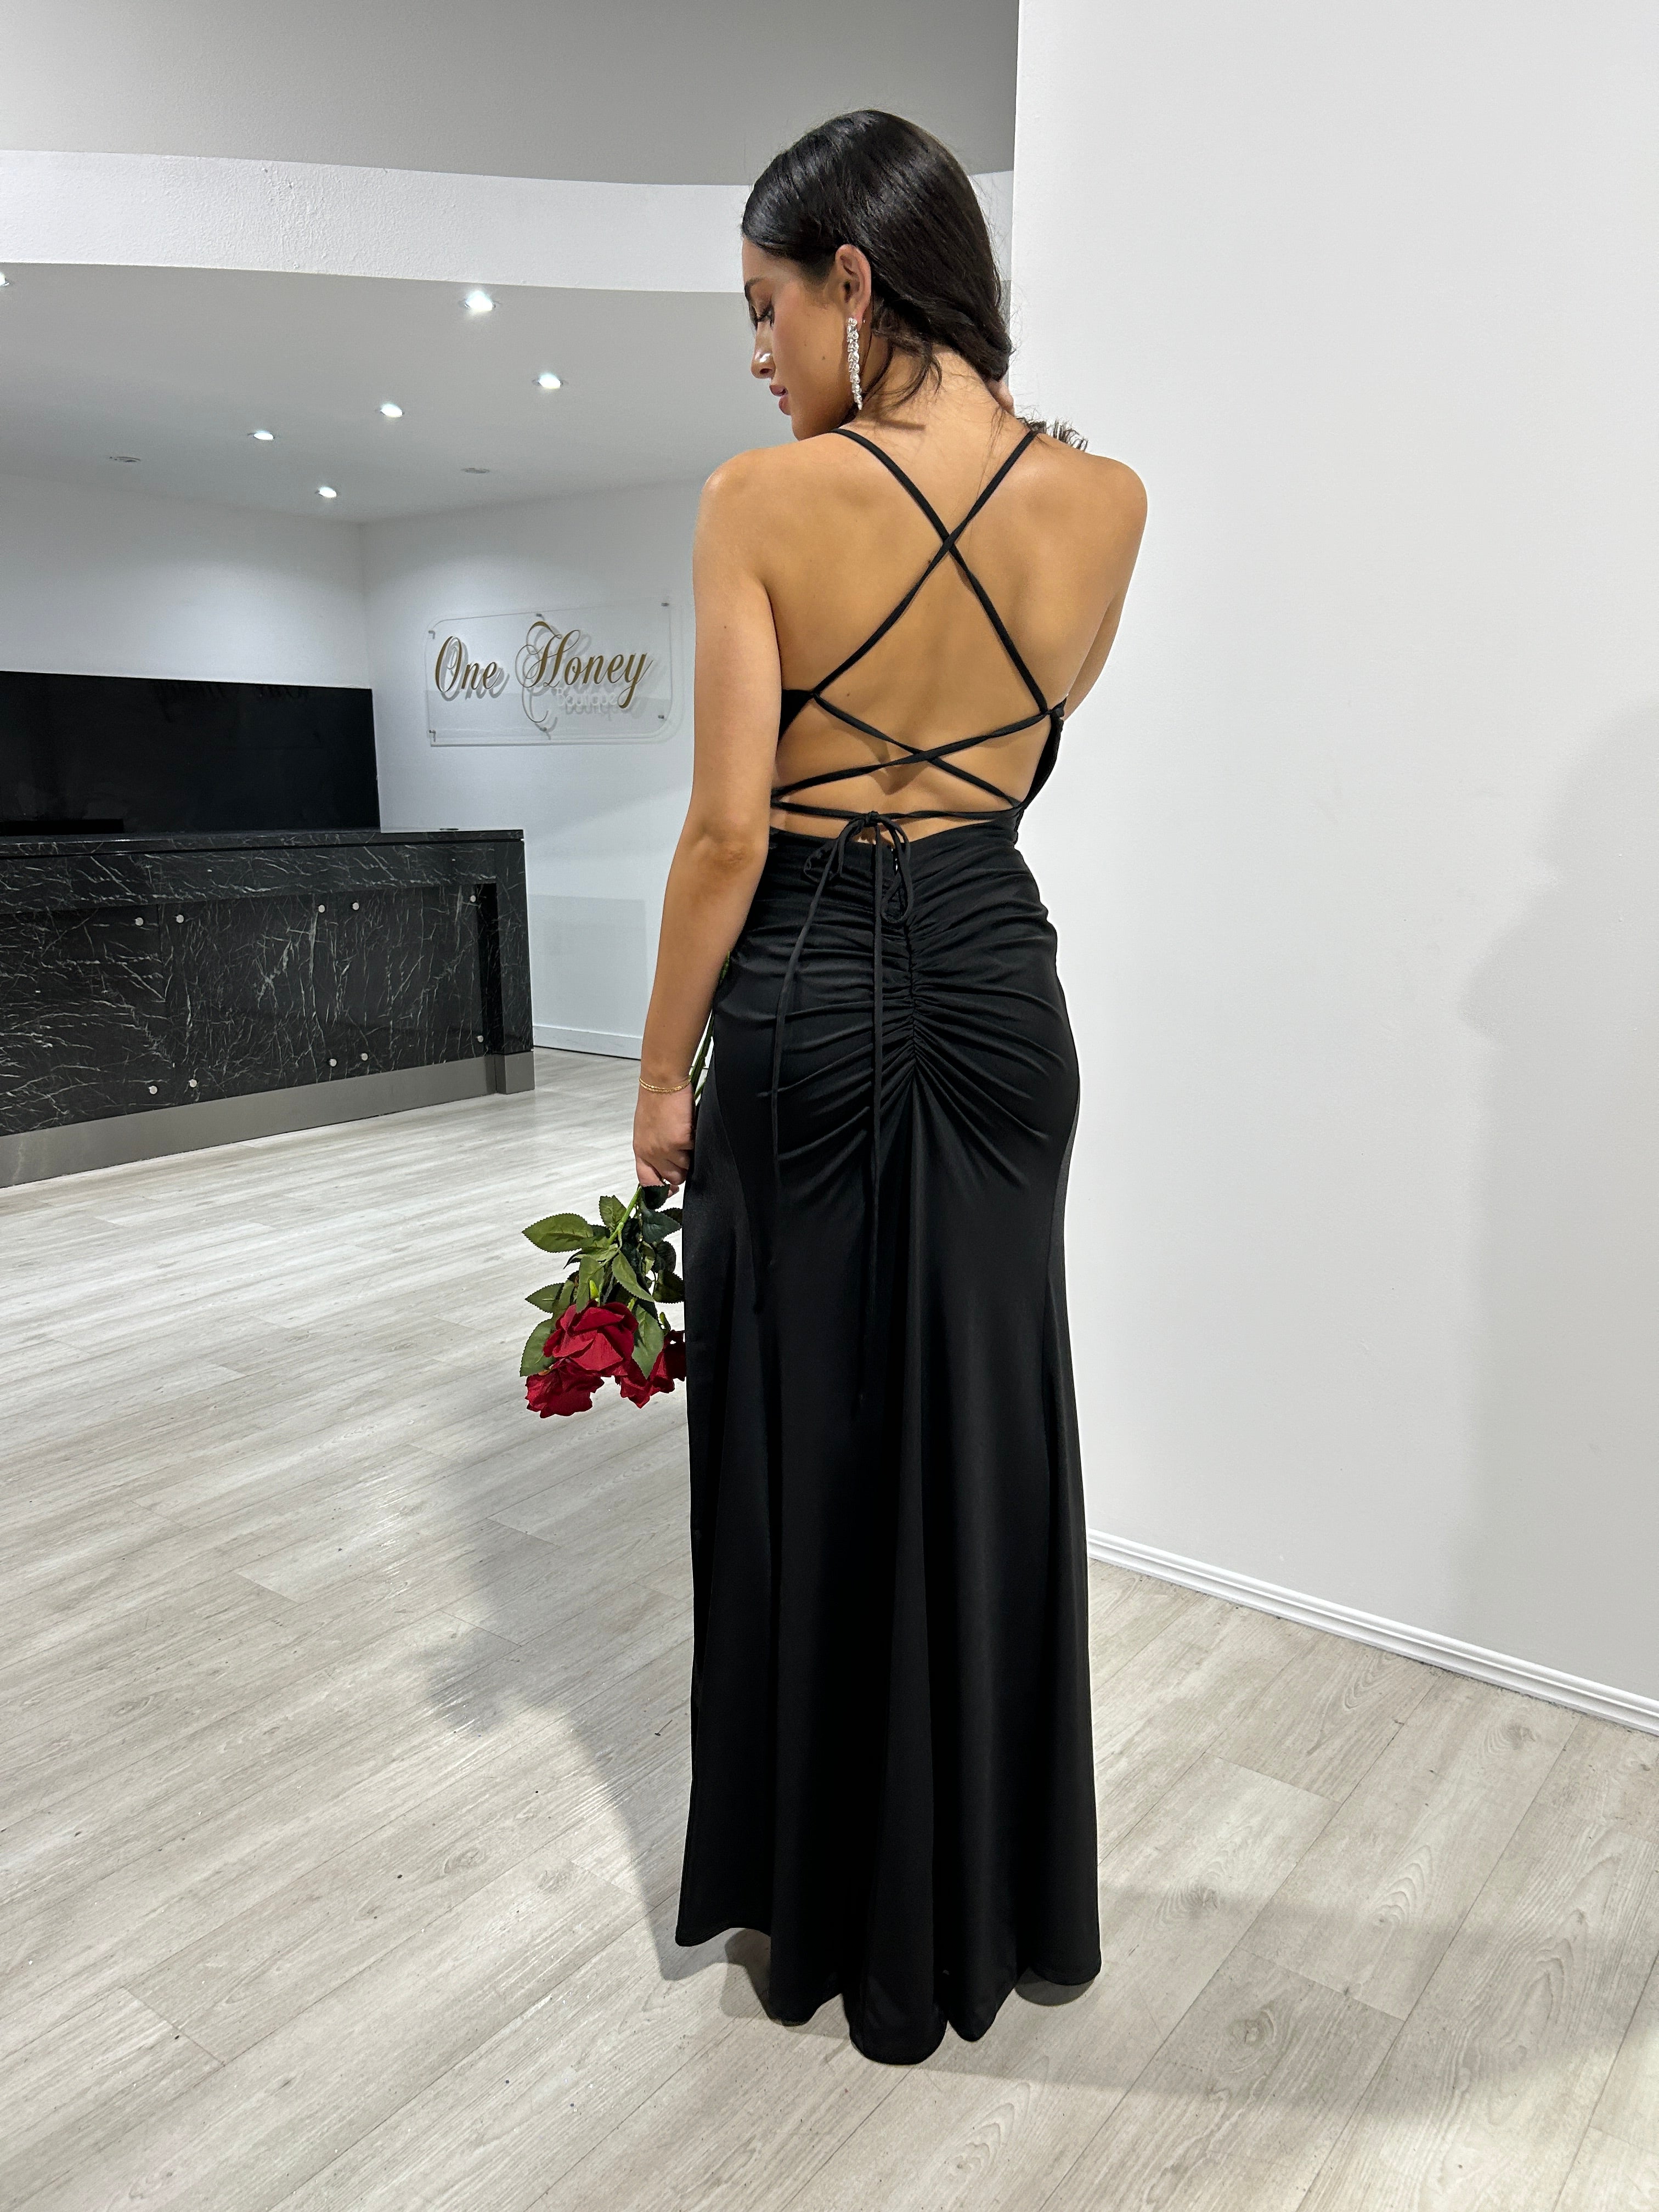 Honey Couture ELODIE Black Silky Lace Up Low Back Mermaid Formal Dress